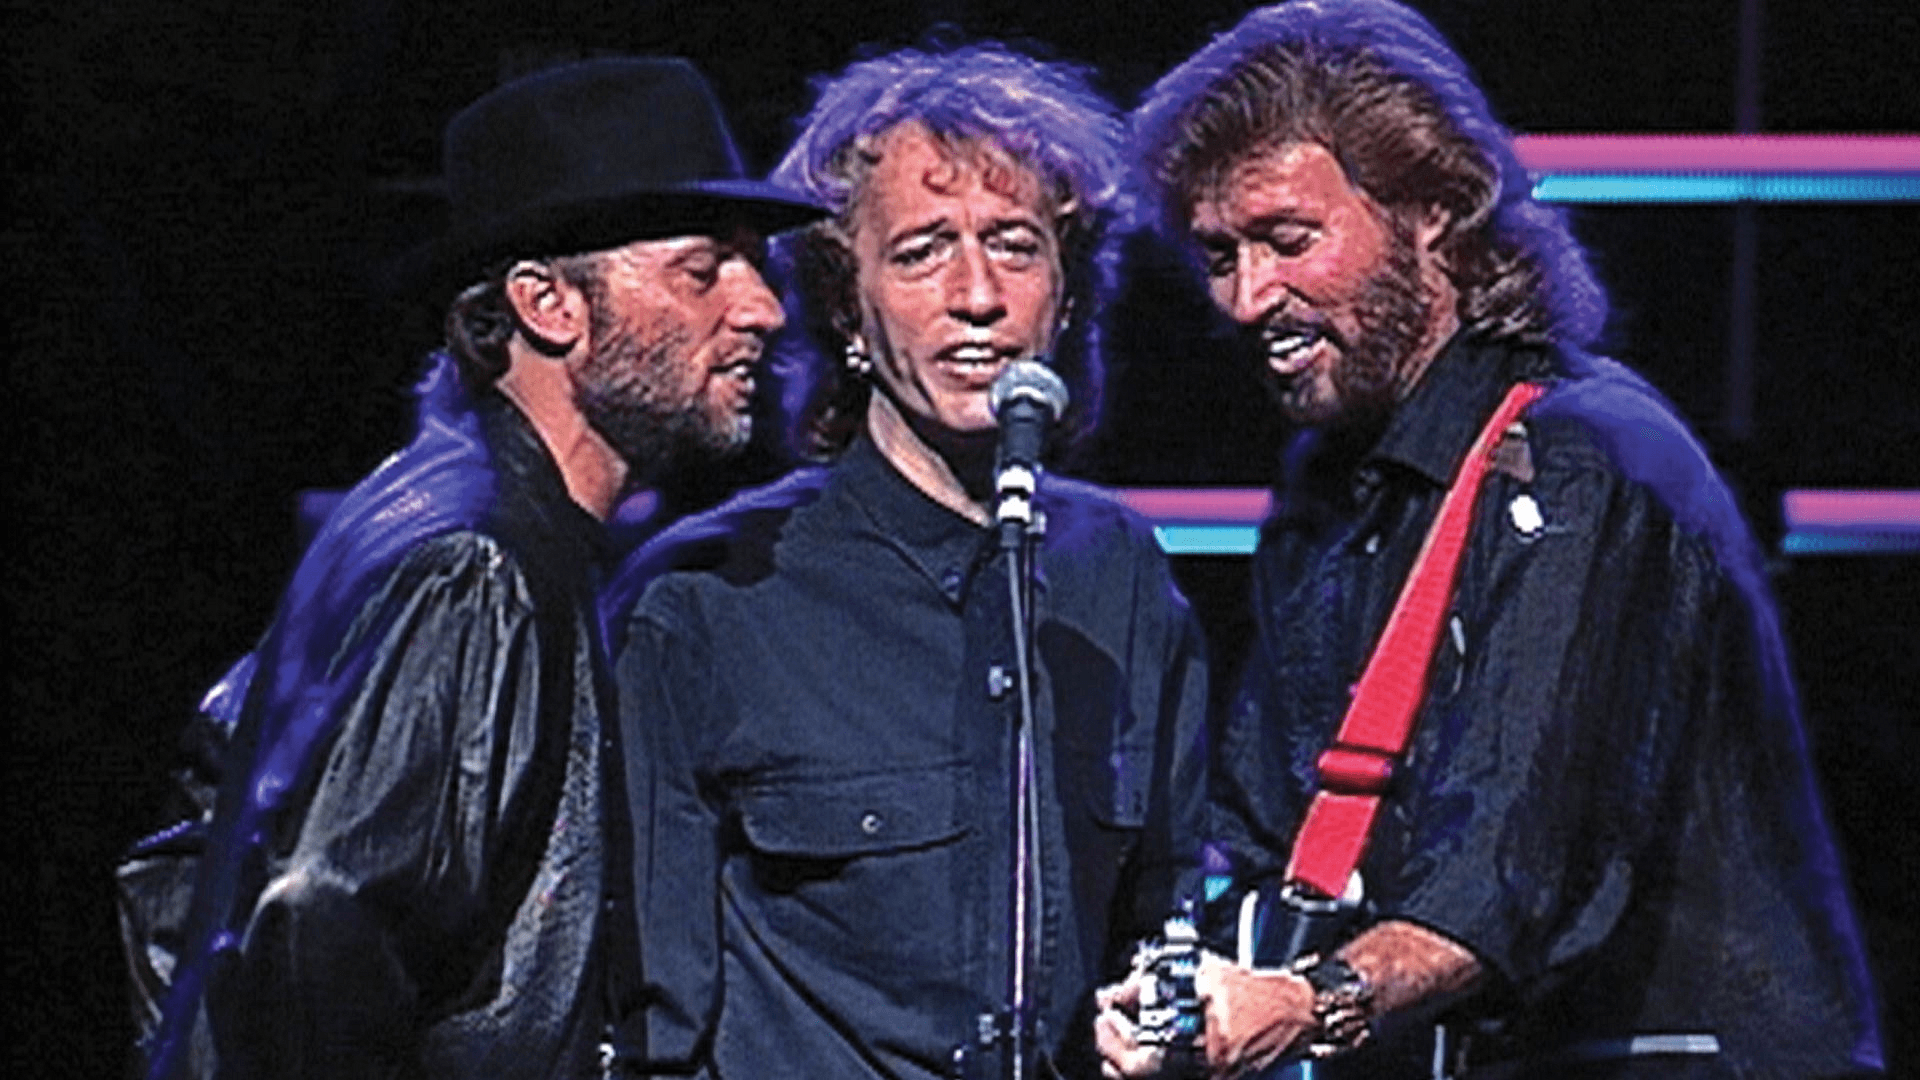 The Bee Gees - One For All Tour: Live in Australia